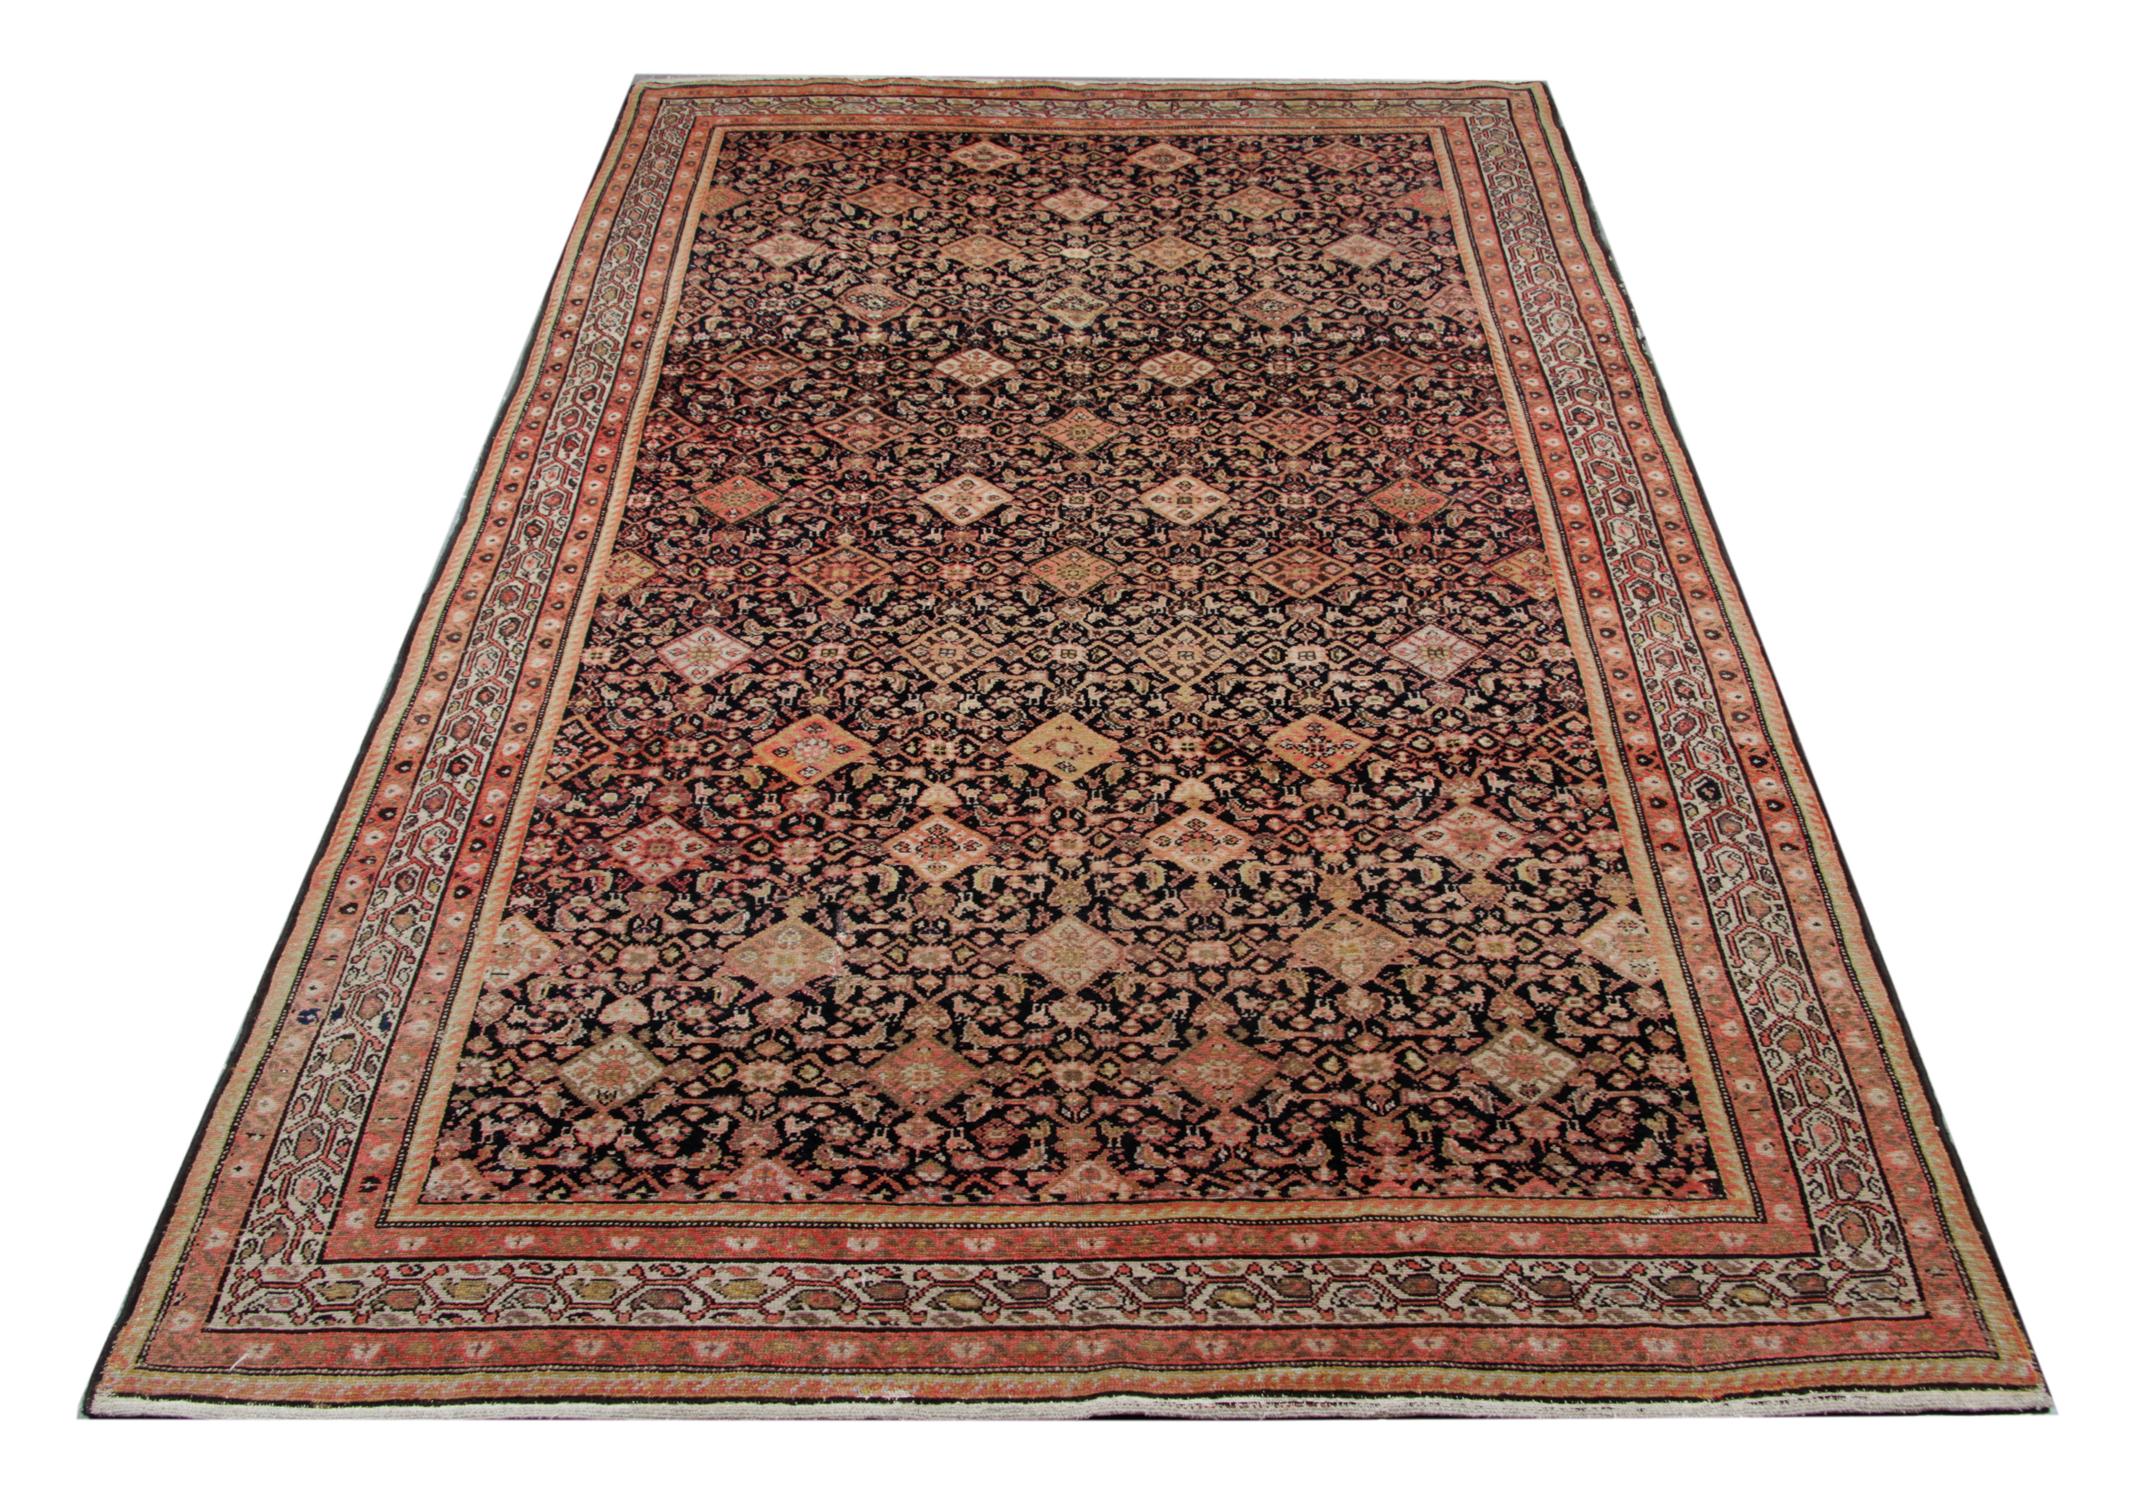 This antique rug was woven in the 1880s and features a beautifully symmetrical repeat pattern design with geometric diamond motifs. Orange and black colours contrast beautifully, creating a unique, eyecatching piece. The intricate design and